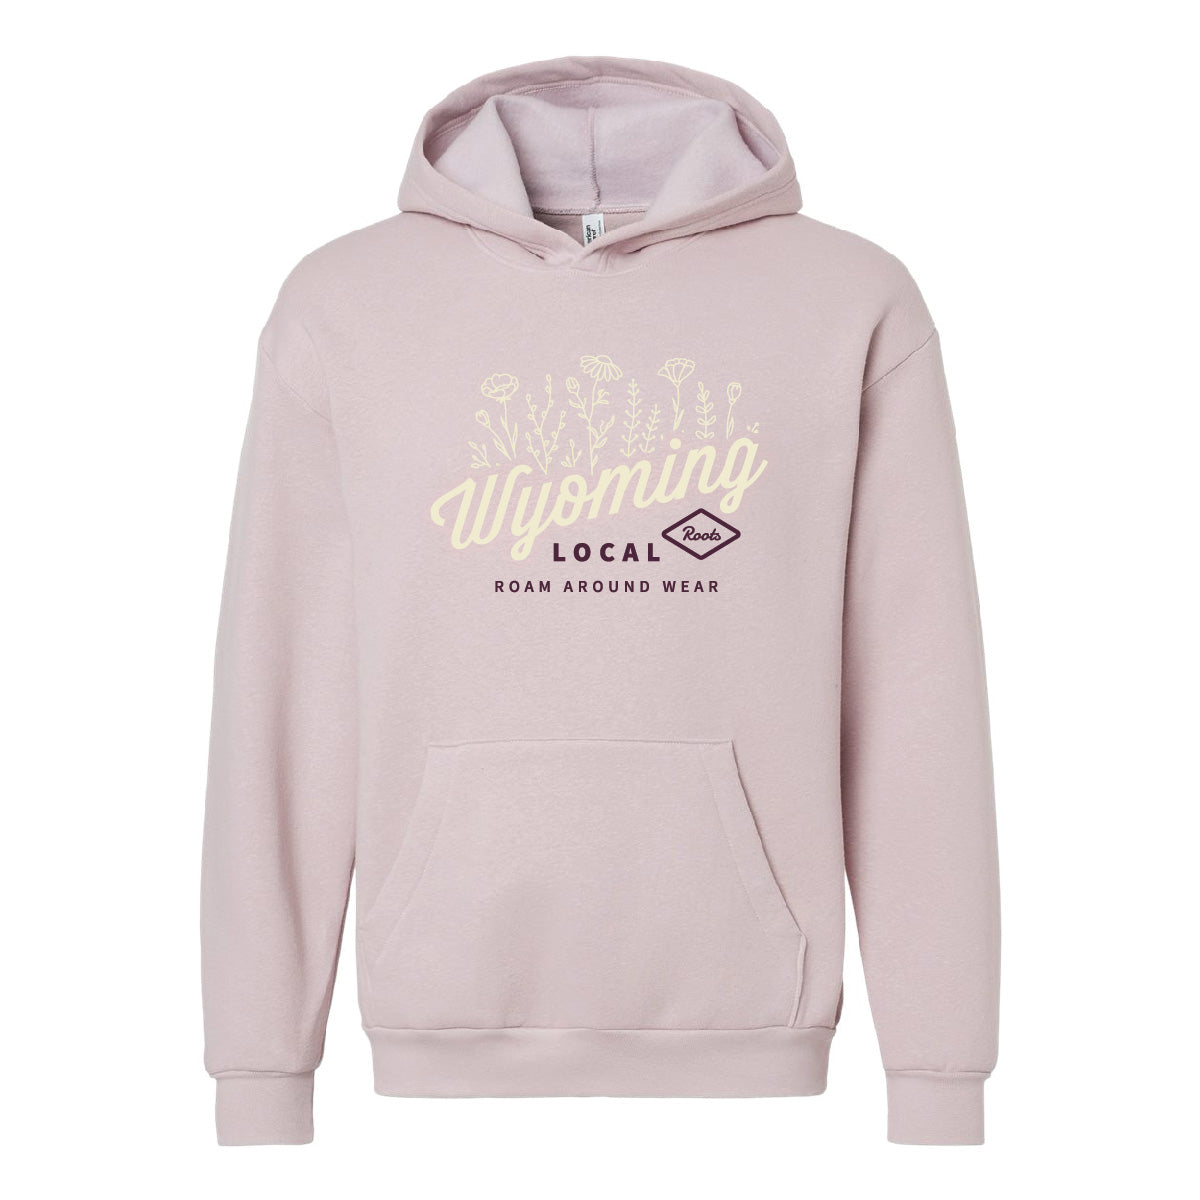 Spring Hoodie. Wyoming floral Hooded Sweatshirt. Wyoming Hoodie. Unisex Hooded Sweatshirt. Women's blush hoodie with beige and eggplant floral. Roam Around Wear is a Wyoming t-shirt company based in Gillette, Wyoming